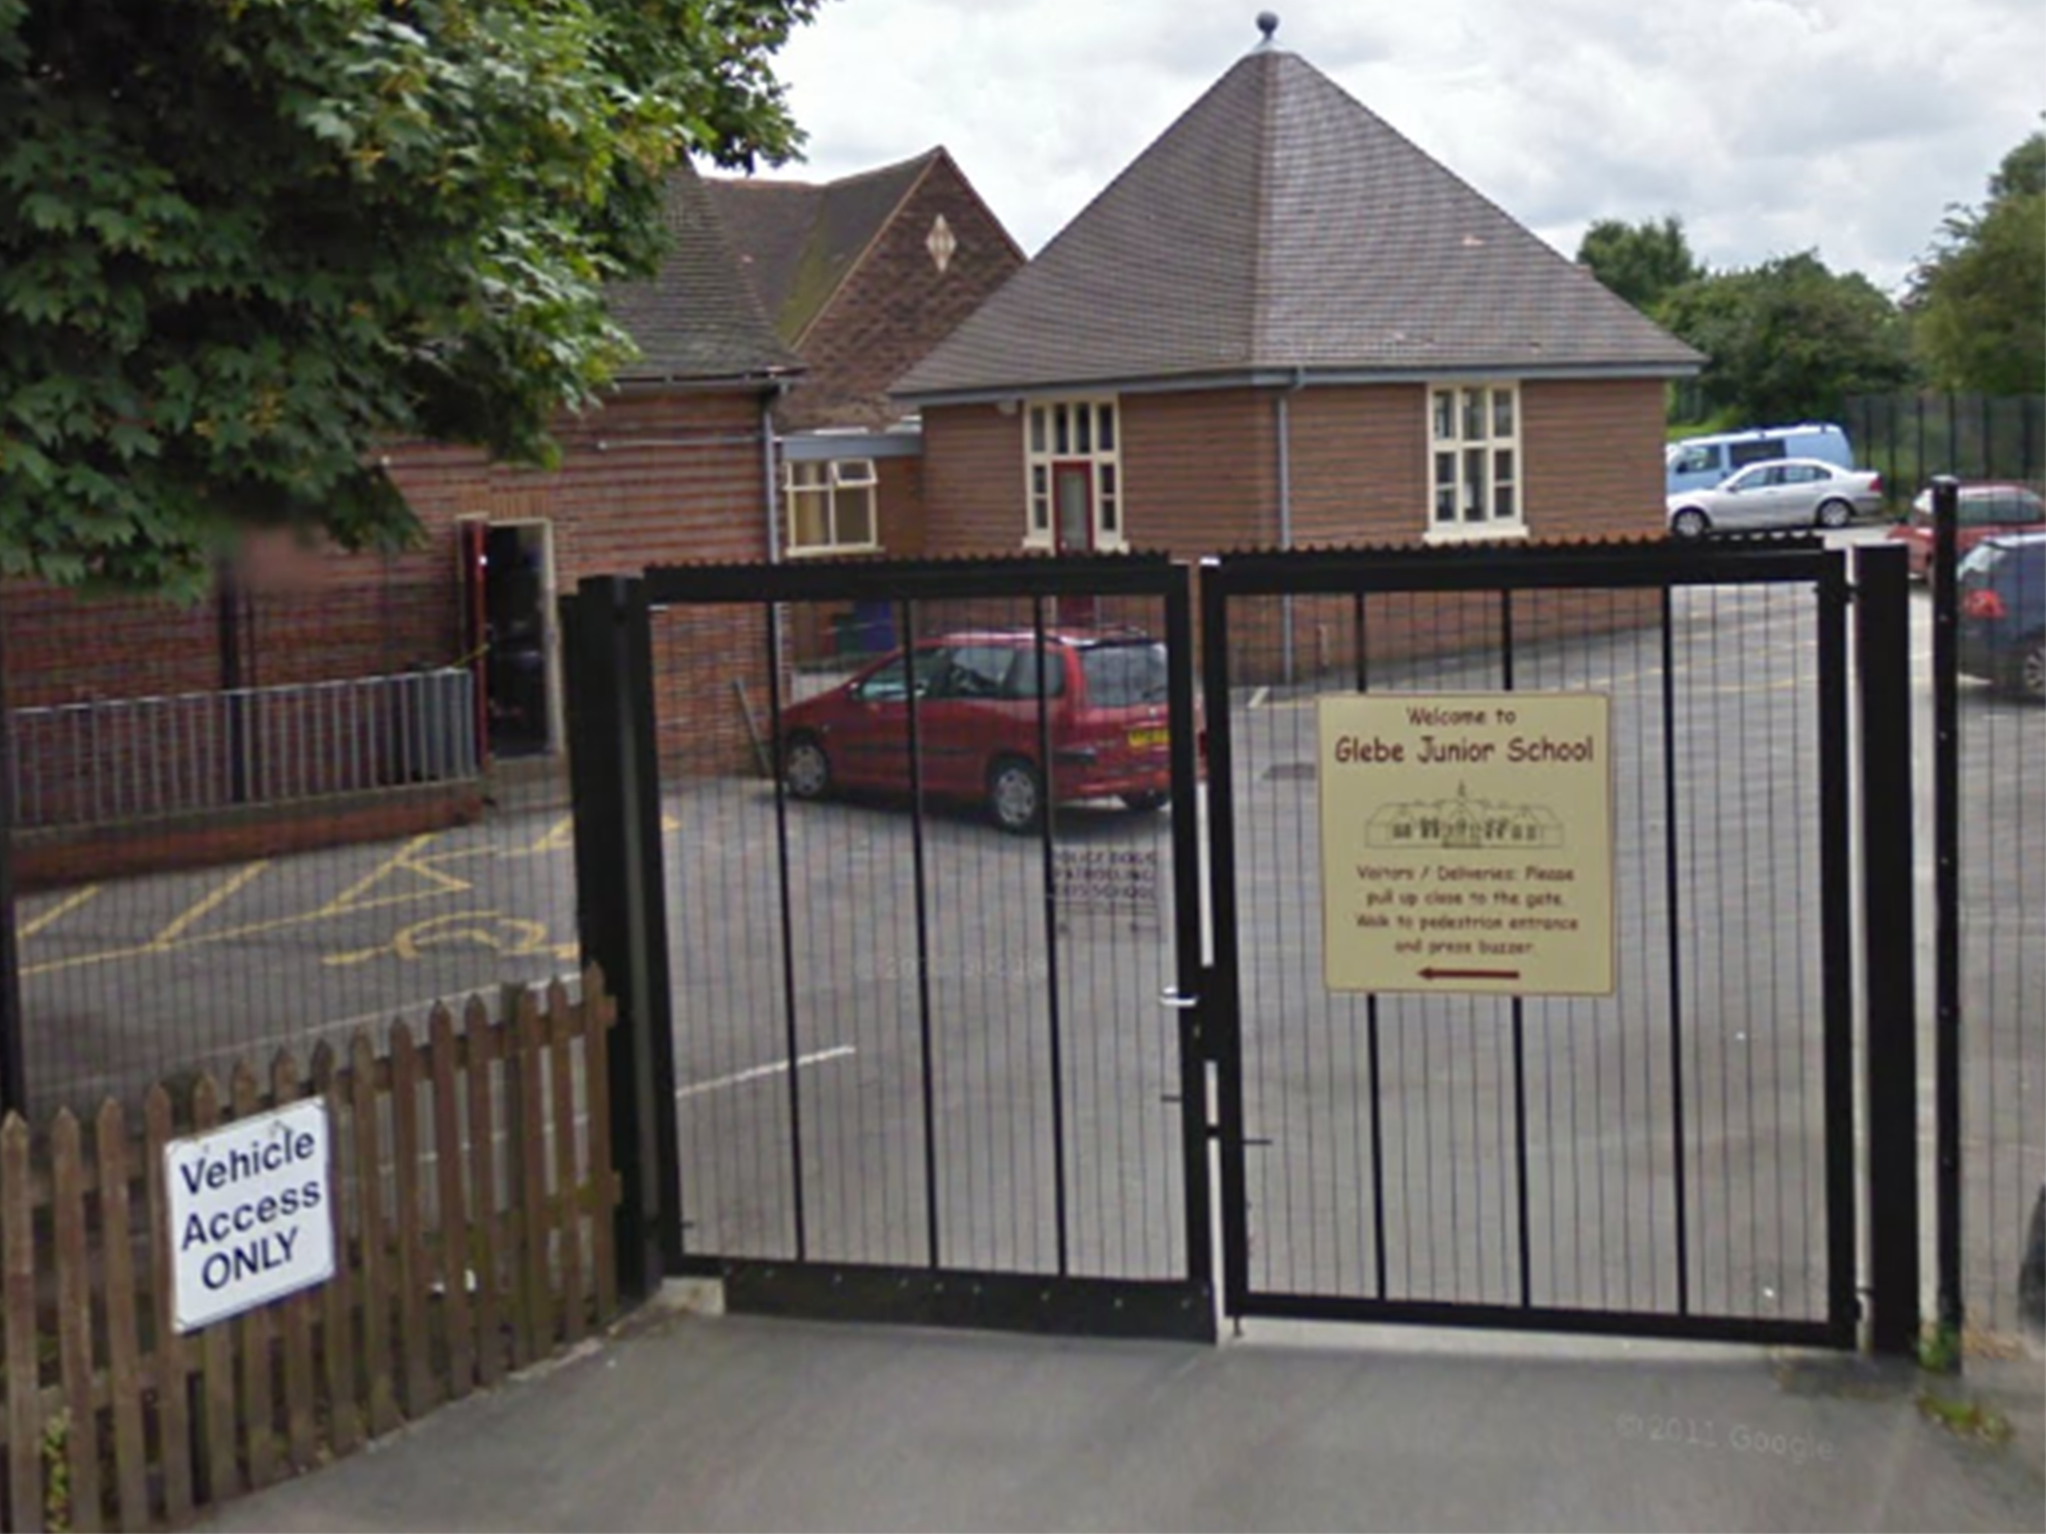 Mrs Pendleton was described as having an 'exemplary' teaching record at Glebe Junior School in South Normanton, Derbyshire